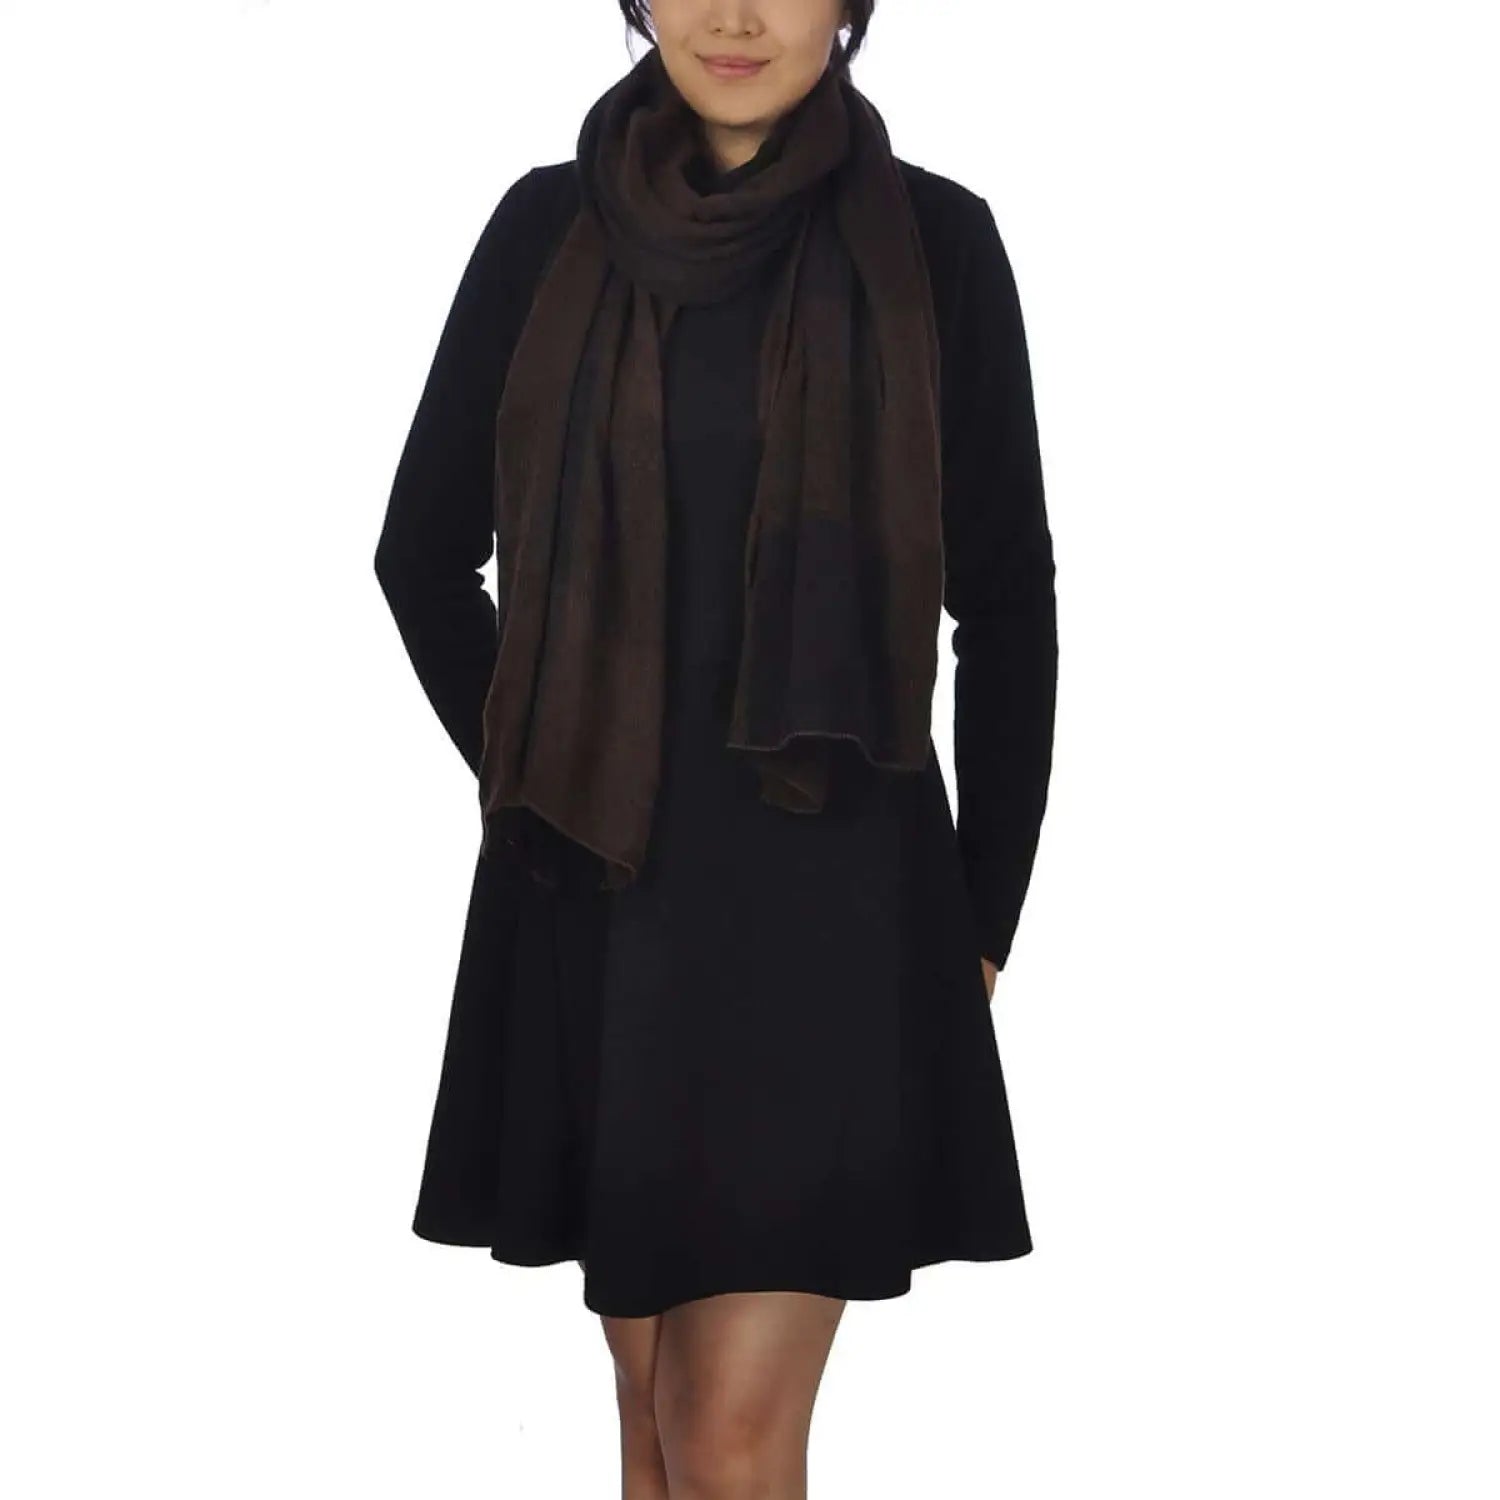 Woman in black dress and brown scarf, Warm Oversized Checked Blanket Scarf model